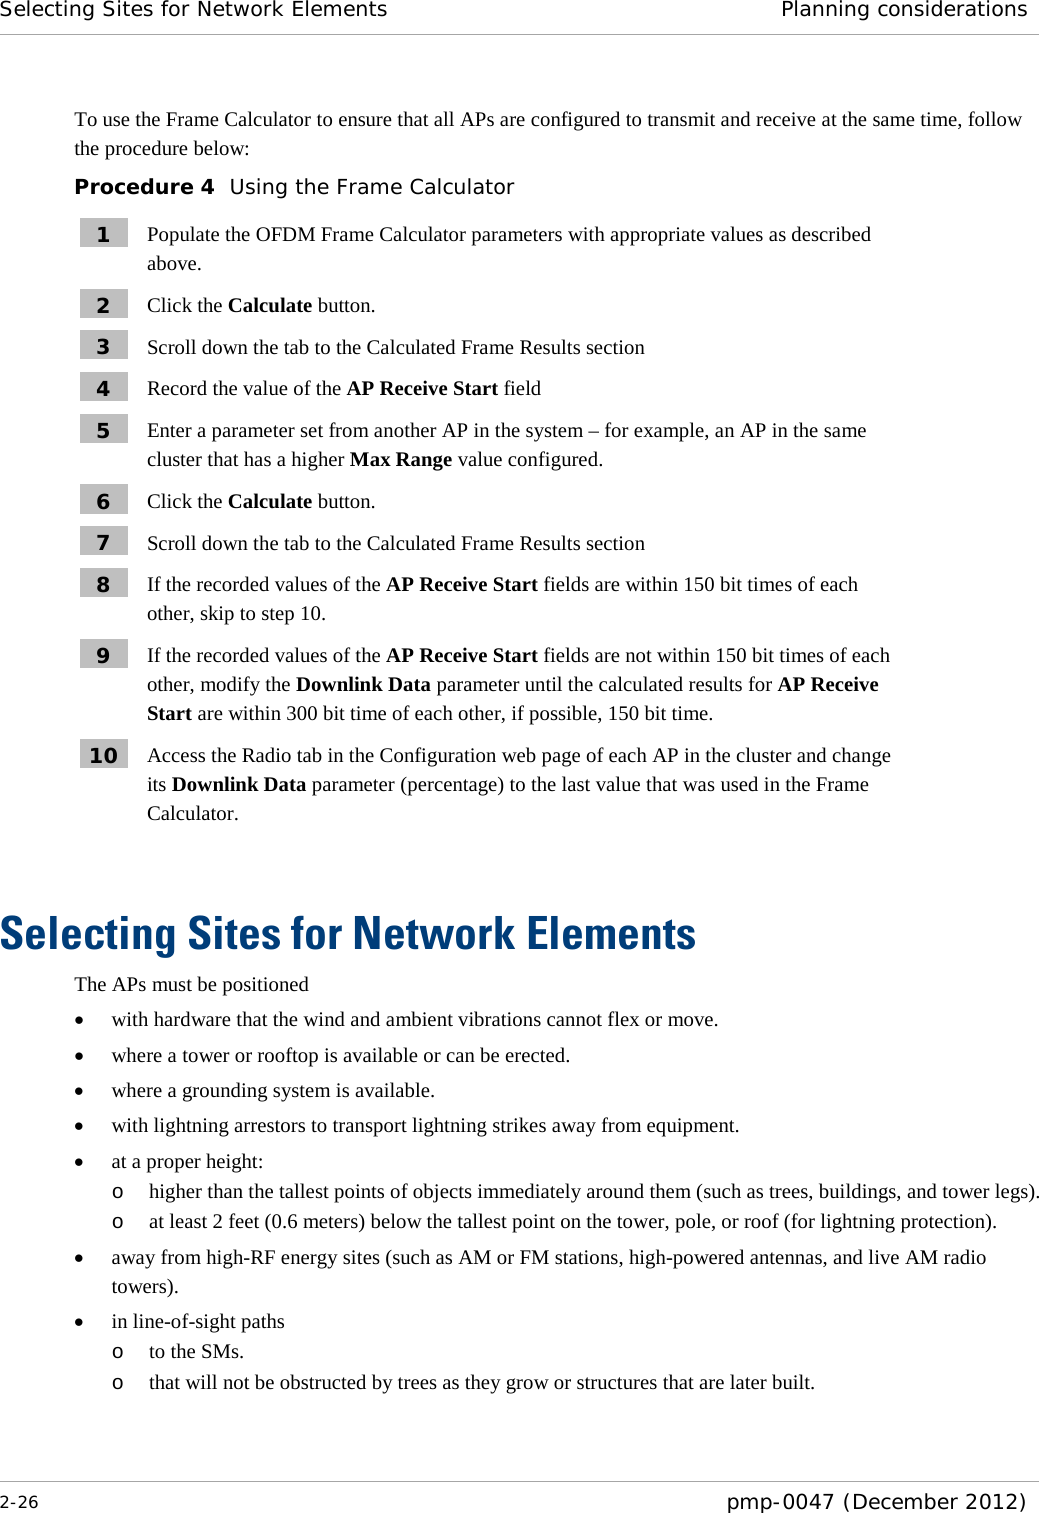 Selecting Sites for Network Elements Planning considerations  2-26  pmp-0047 (December 2012)  To use the Frame Calculator to ensure that all APs are configured to transmit and receive at the same time, follow the procedure below: Procedure 4  Using the Frame Calculator 1  Populate the OFDM Frame Calculator parameters with appropriate values as described above. 2  Click the Calculate button. 3  Scroll down the tab to the Calculated Frame Results section 4  Record the value of the AP Receive Start field 5  Enter a parameter set from another AP in the system – for example, an AP in the same cluster that has a higher Max Range value configured. 6  Click the Calculate button. 7  Scroll down the tab to the Calculated Frame Results section 8  If the recorded values of the AP Receive Start fields are within 150 bit times of each other, skip to step 10. 9  If the recorded values of the AP Receive Start fields are not within 150 bit times of each other, modify the Downlink Data parameter until the calculated results for AP Receive Start are within 300 bit time of each other, if possible, 150 bit time. 10  Access the Radio tab in the Configuration web page of each AP in the cluster and change its Downlink Data parameter (percentage) to the last value that was used in the Frame Calculator.  Selecting Sites for Network Elements The APs must be positioned • with hardware that the wind and ambient vibrations cannot flex or move. • where a tower or rooftop is available or can be erected. • where a grounding system is available. • with lightning arrestors to transport lightning strikes away from equipment. • at a proper height: o higher than the tallest points of objects immediately around them (such as trees, buildings, and tower legs).  o at least 2 feet (0.6 meters) below the tallest point on the tower, pole, or roof (for lightning protection). • away from high-RF energy sites (such as AM or FM stations, high-powered antennas, and live AM radio towers). • in line-of-sight paths o to the SMs. o that will not be obstructed by trees as they grow or structures that are later built.  